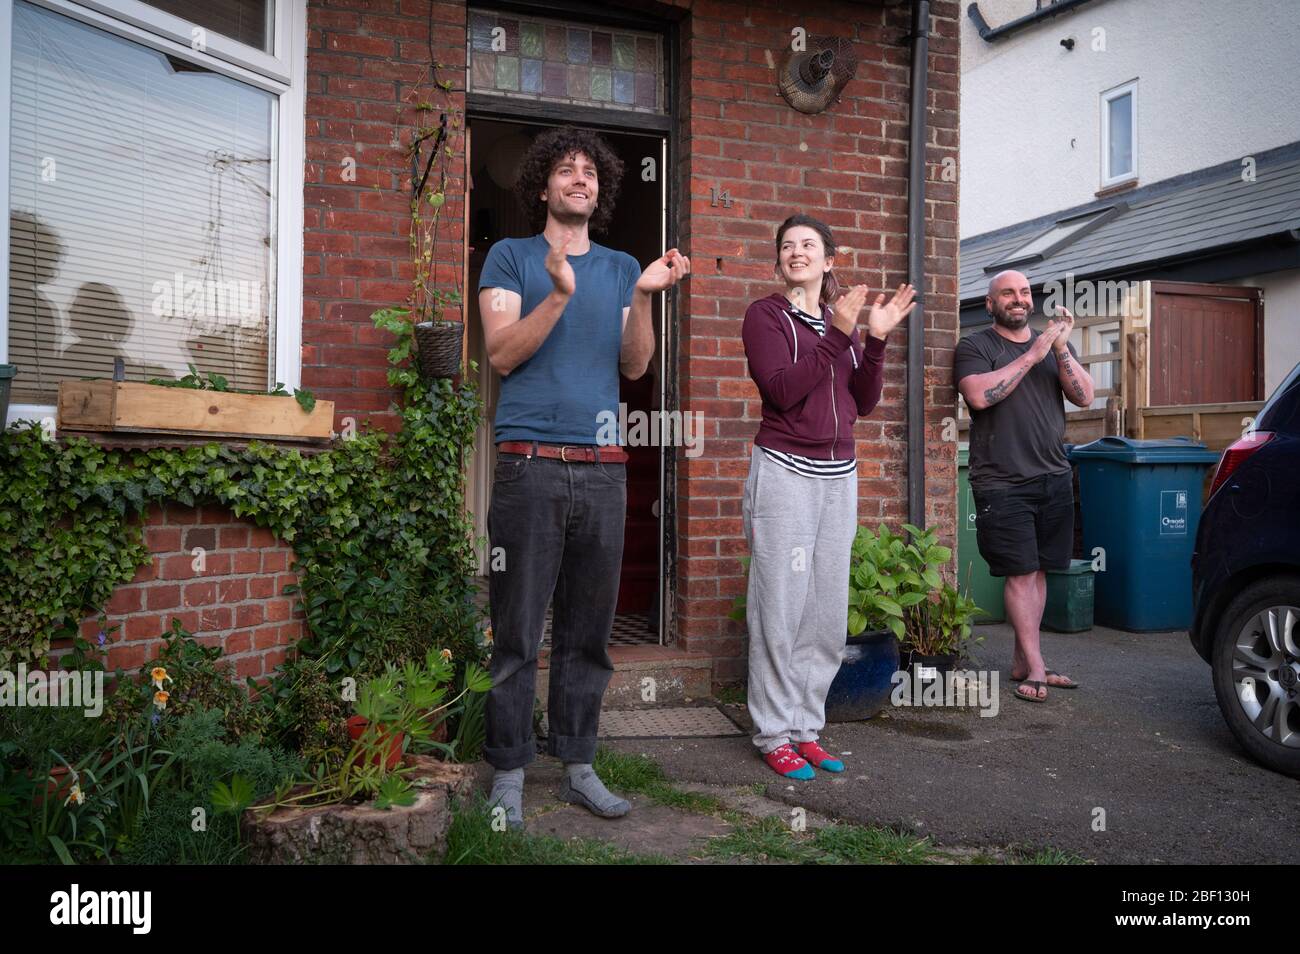 Oxford, UK. 16th Apr, 2020. Residents of Headington, Oxford, clap for the NHS staff as the Covid19 pandemic conitnues. Credit: Andrew Walmsley/Alamy Live News Stock Photo